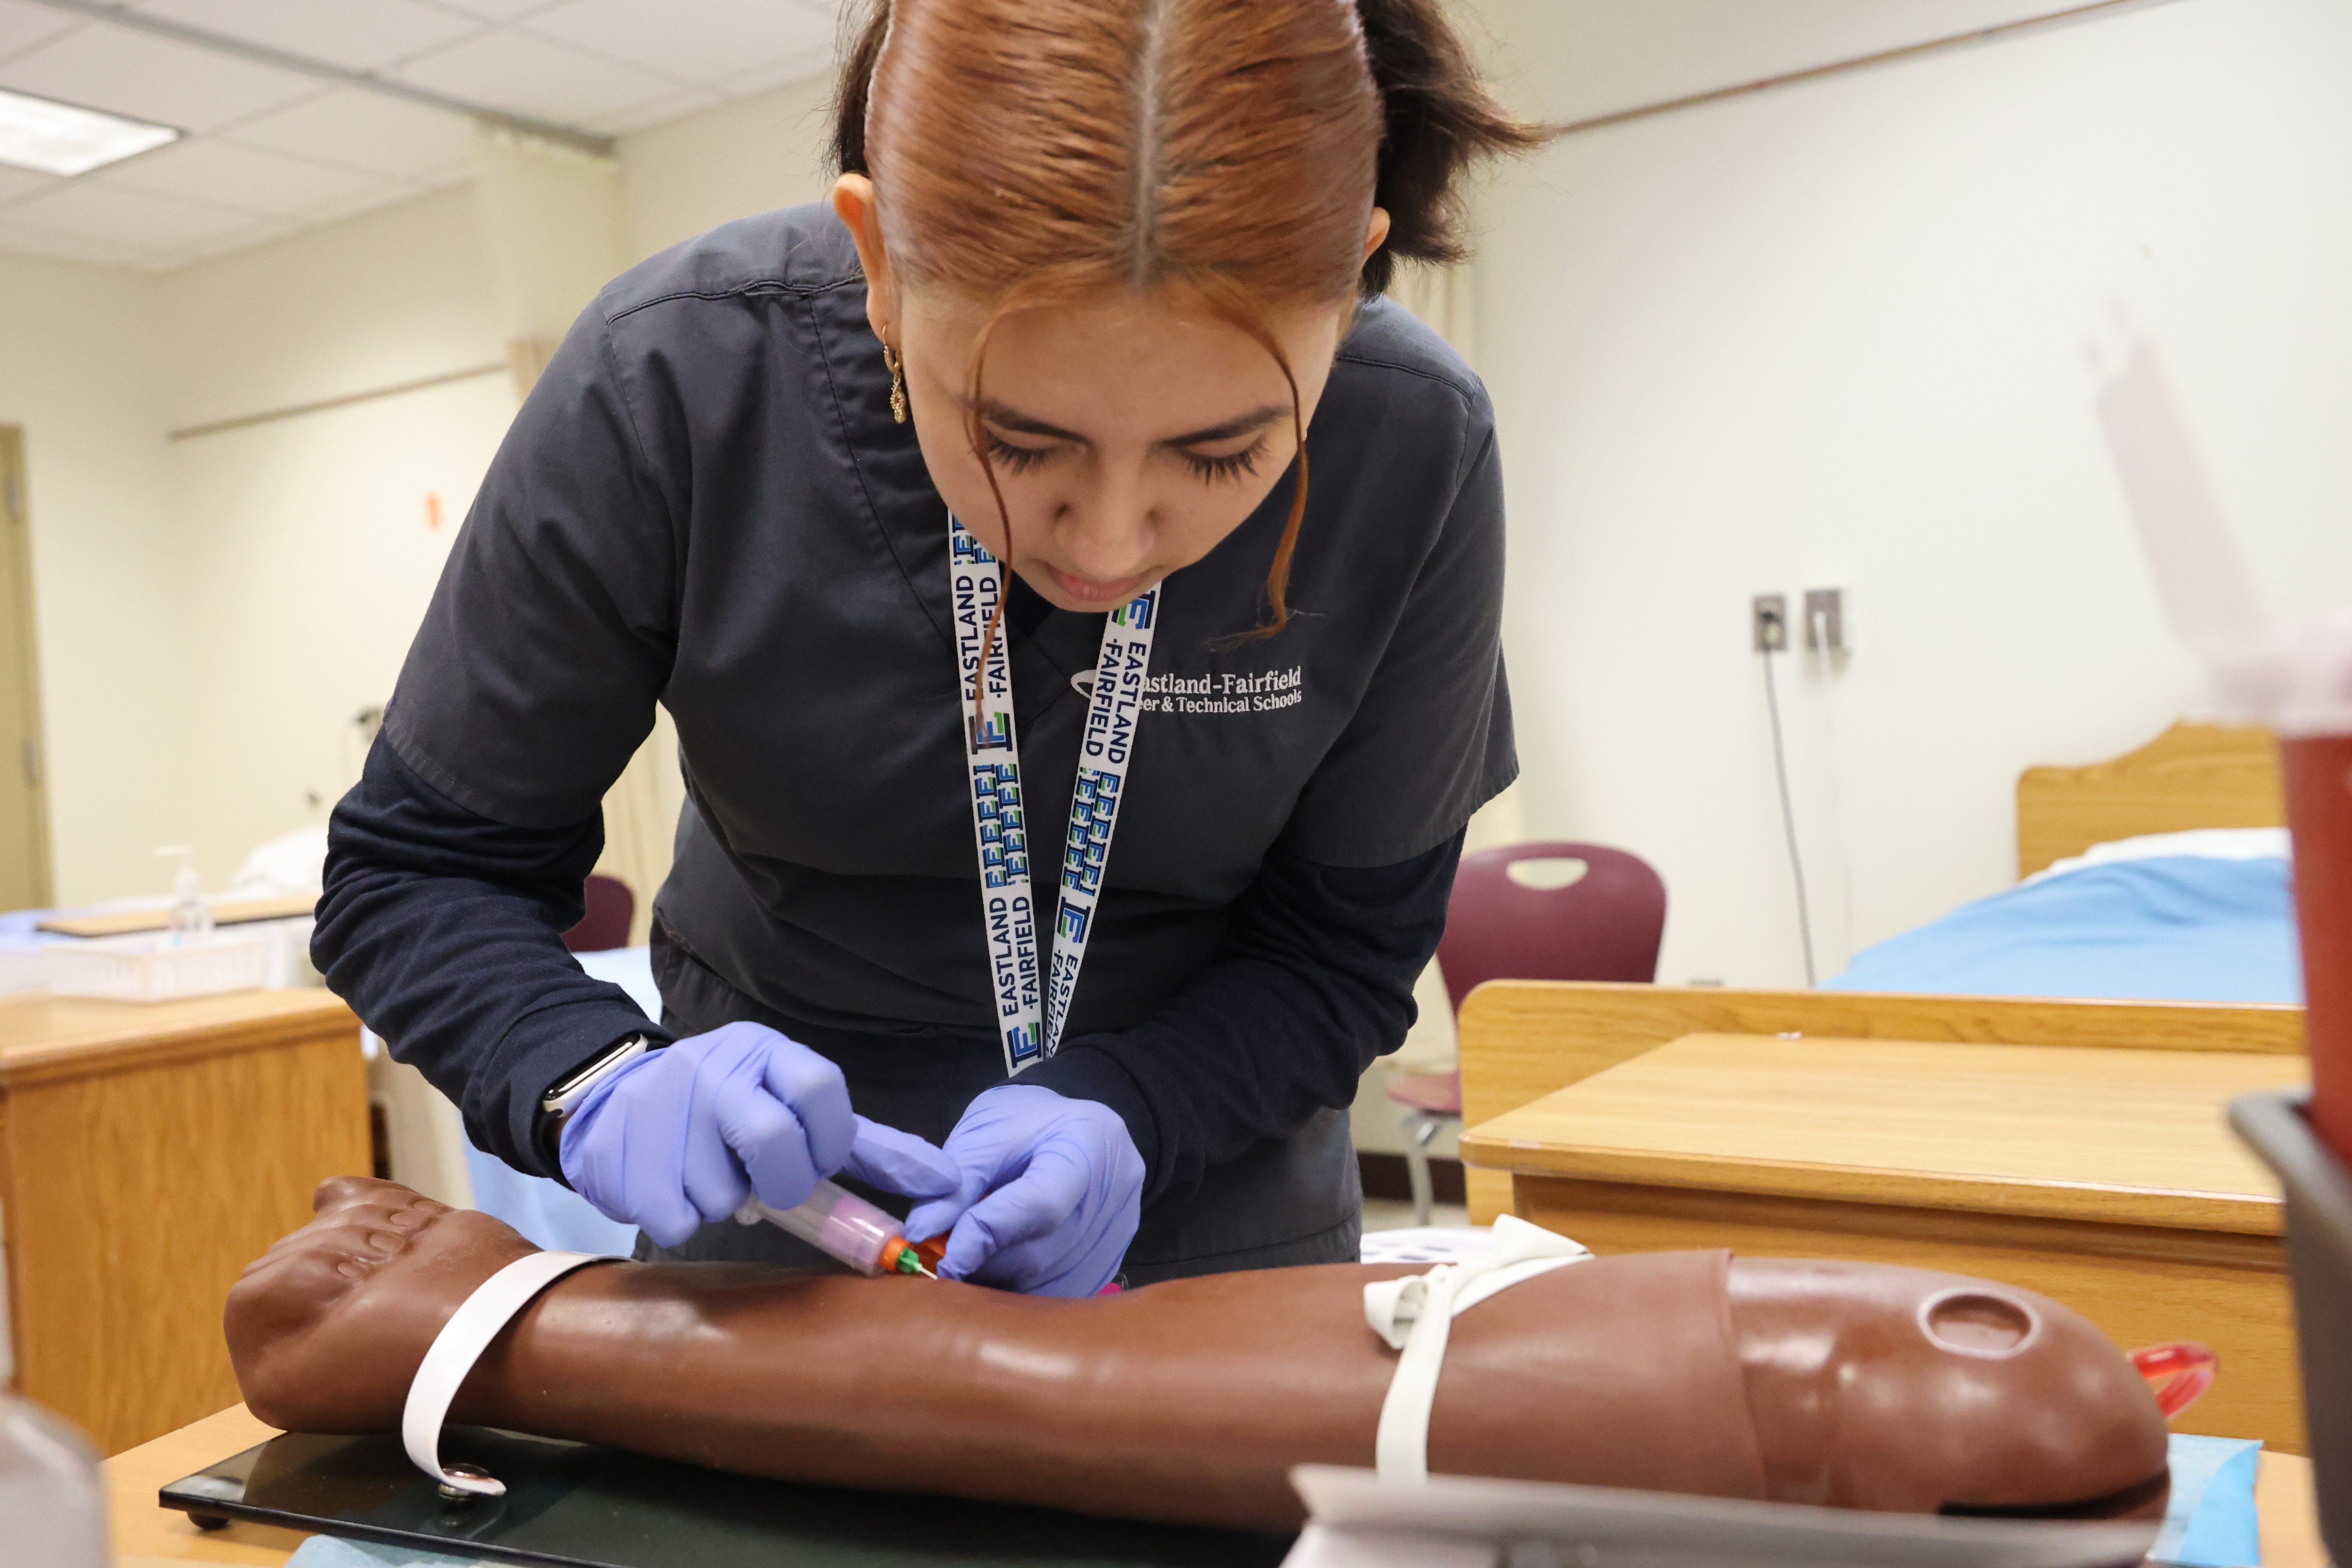 A female student is penetrating a blood drawing needle into a dark colored mannequin arm.